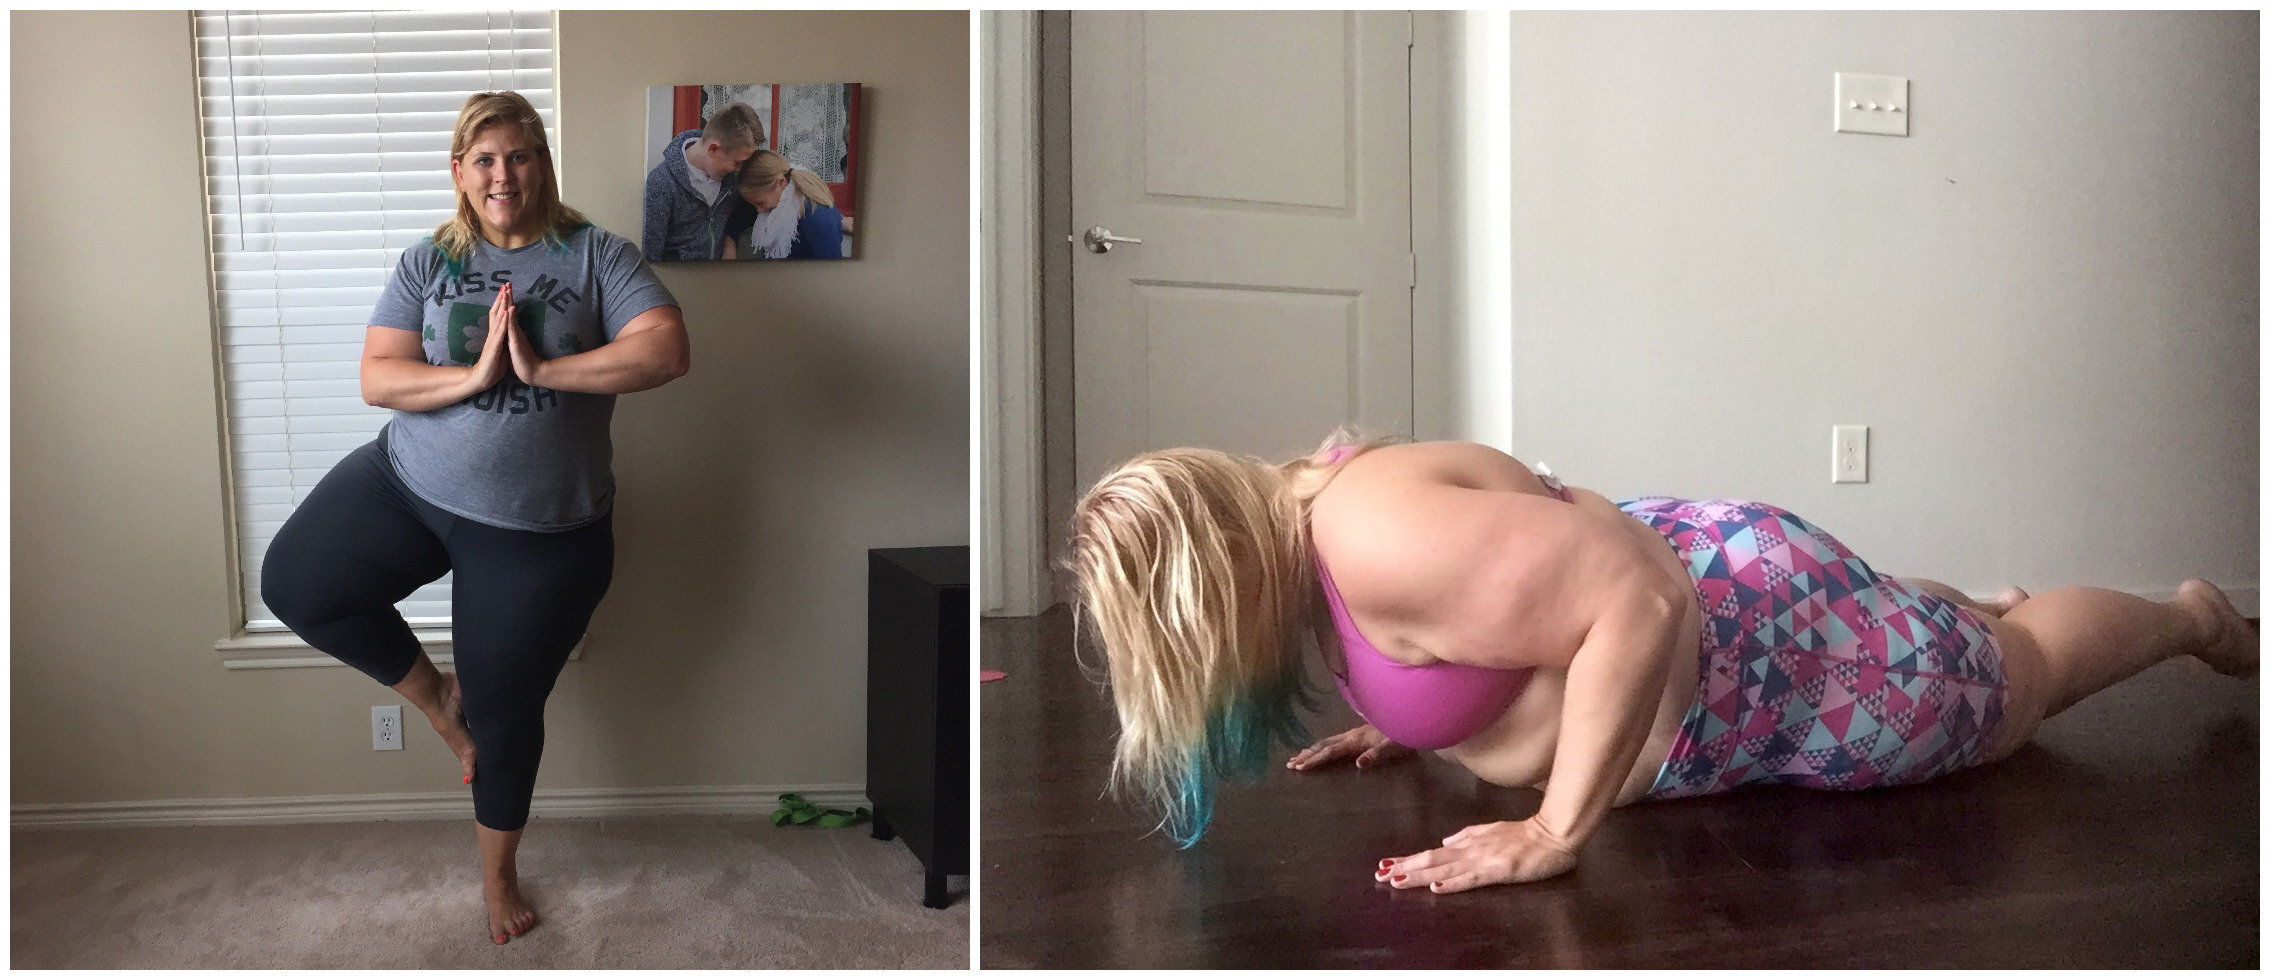 SizeDoesntMatter Challenge Shows That Plus Size Women Can Do Yoga Too